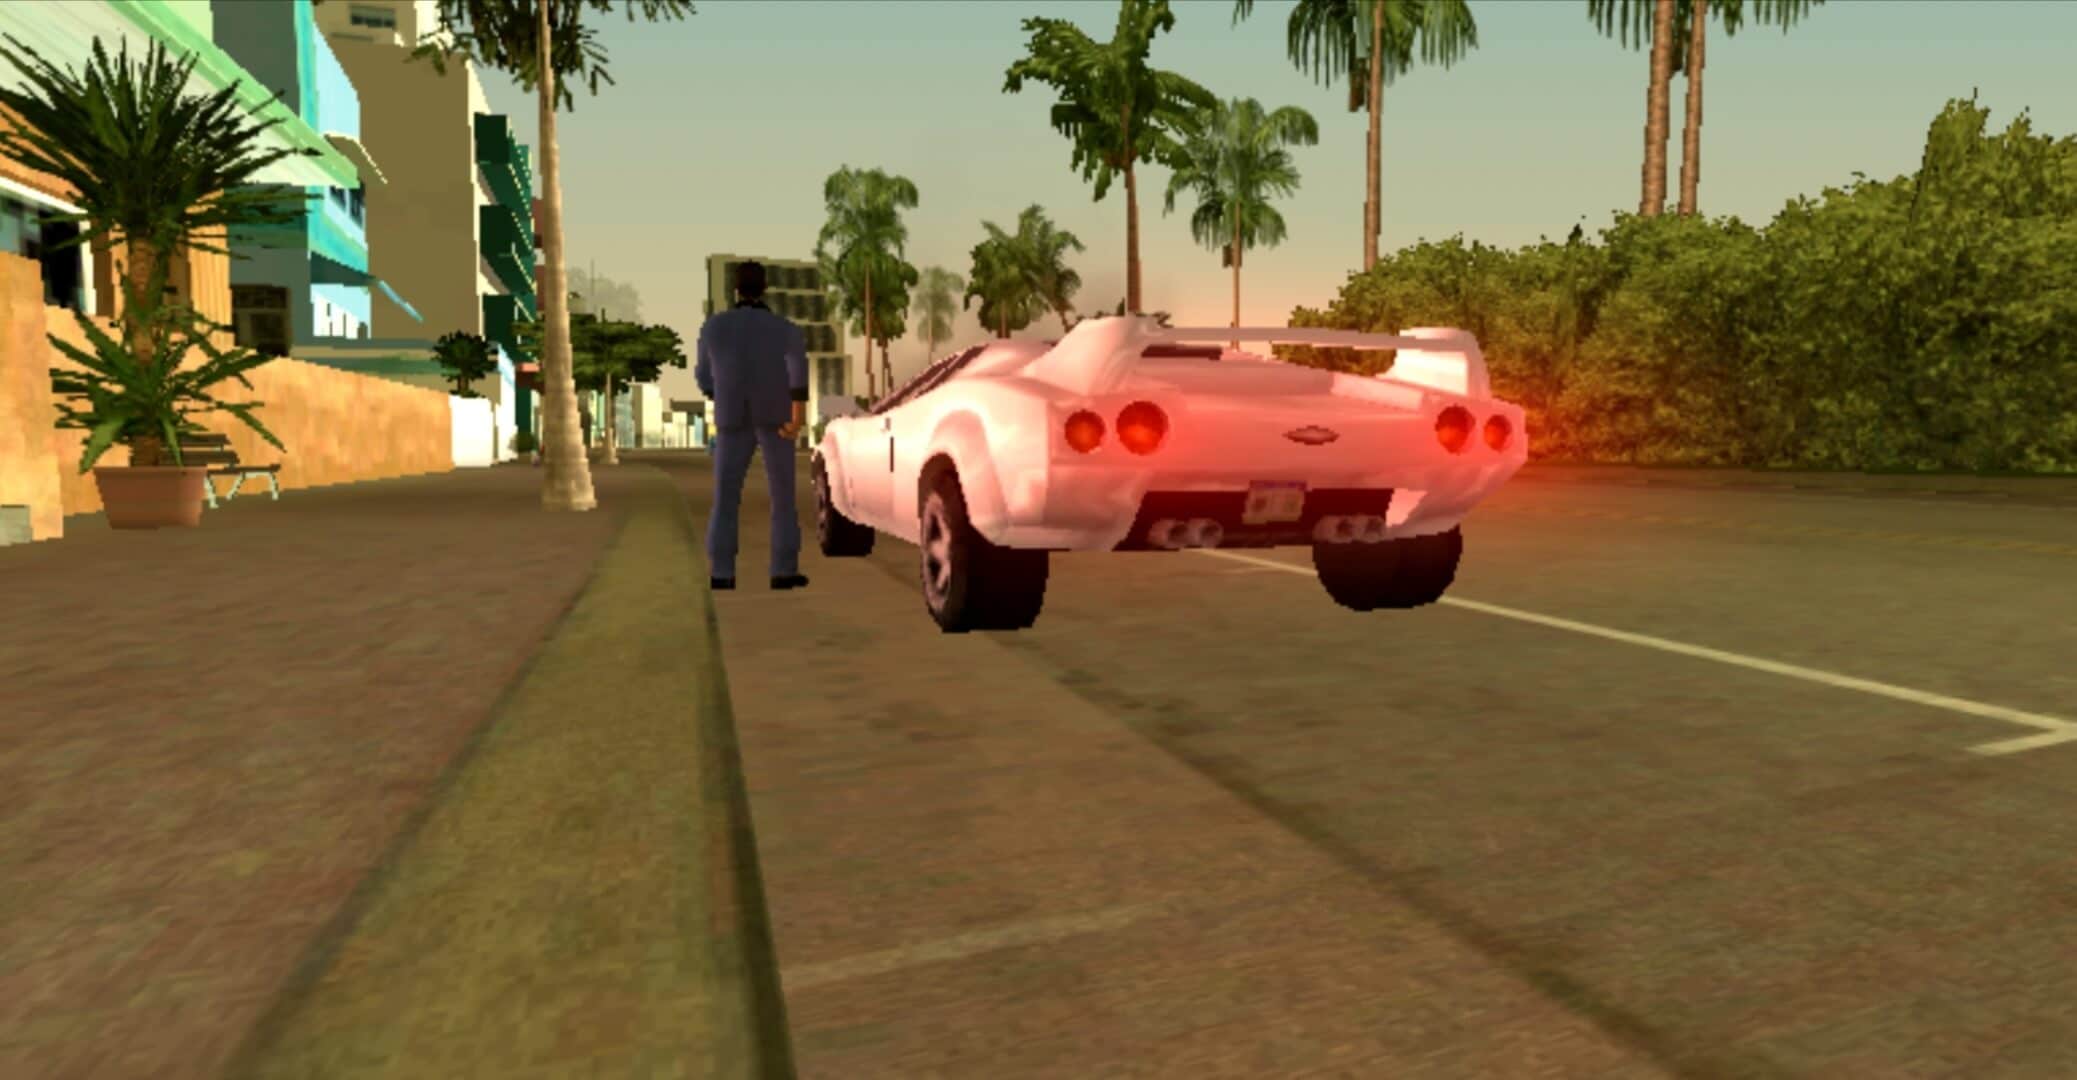 download dhaka vice city for android